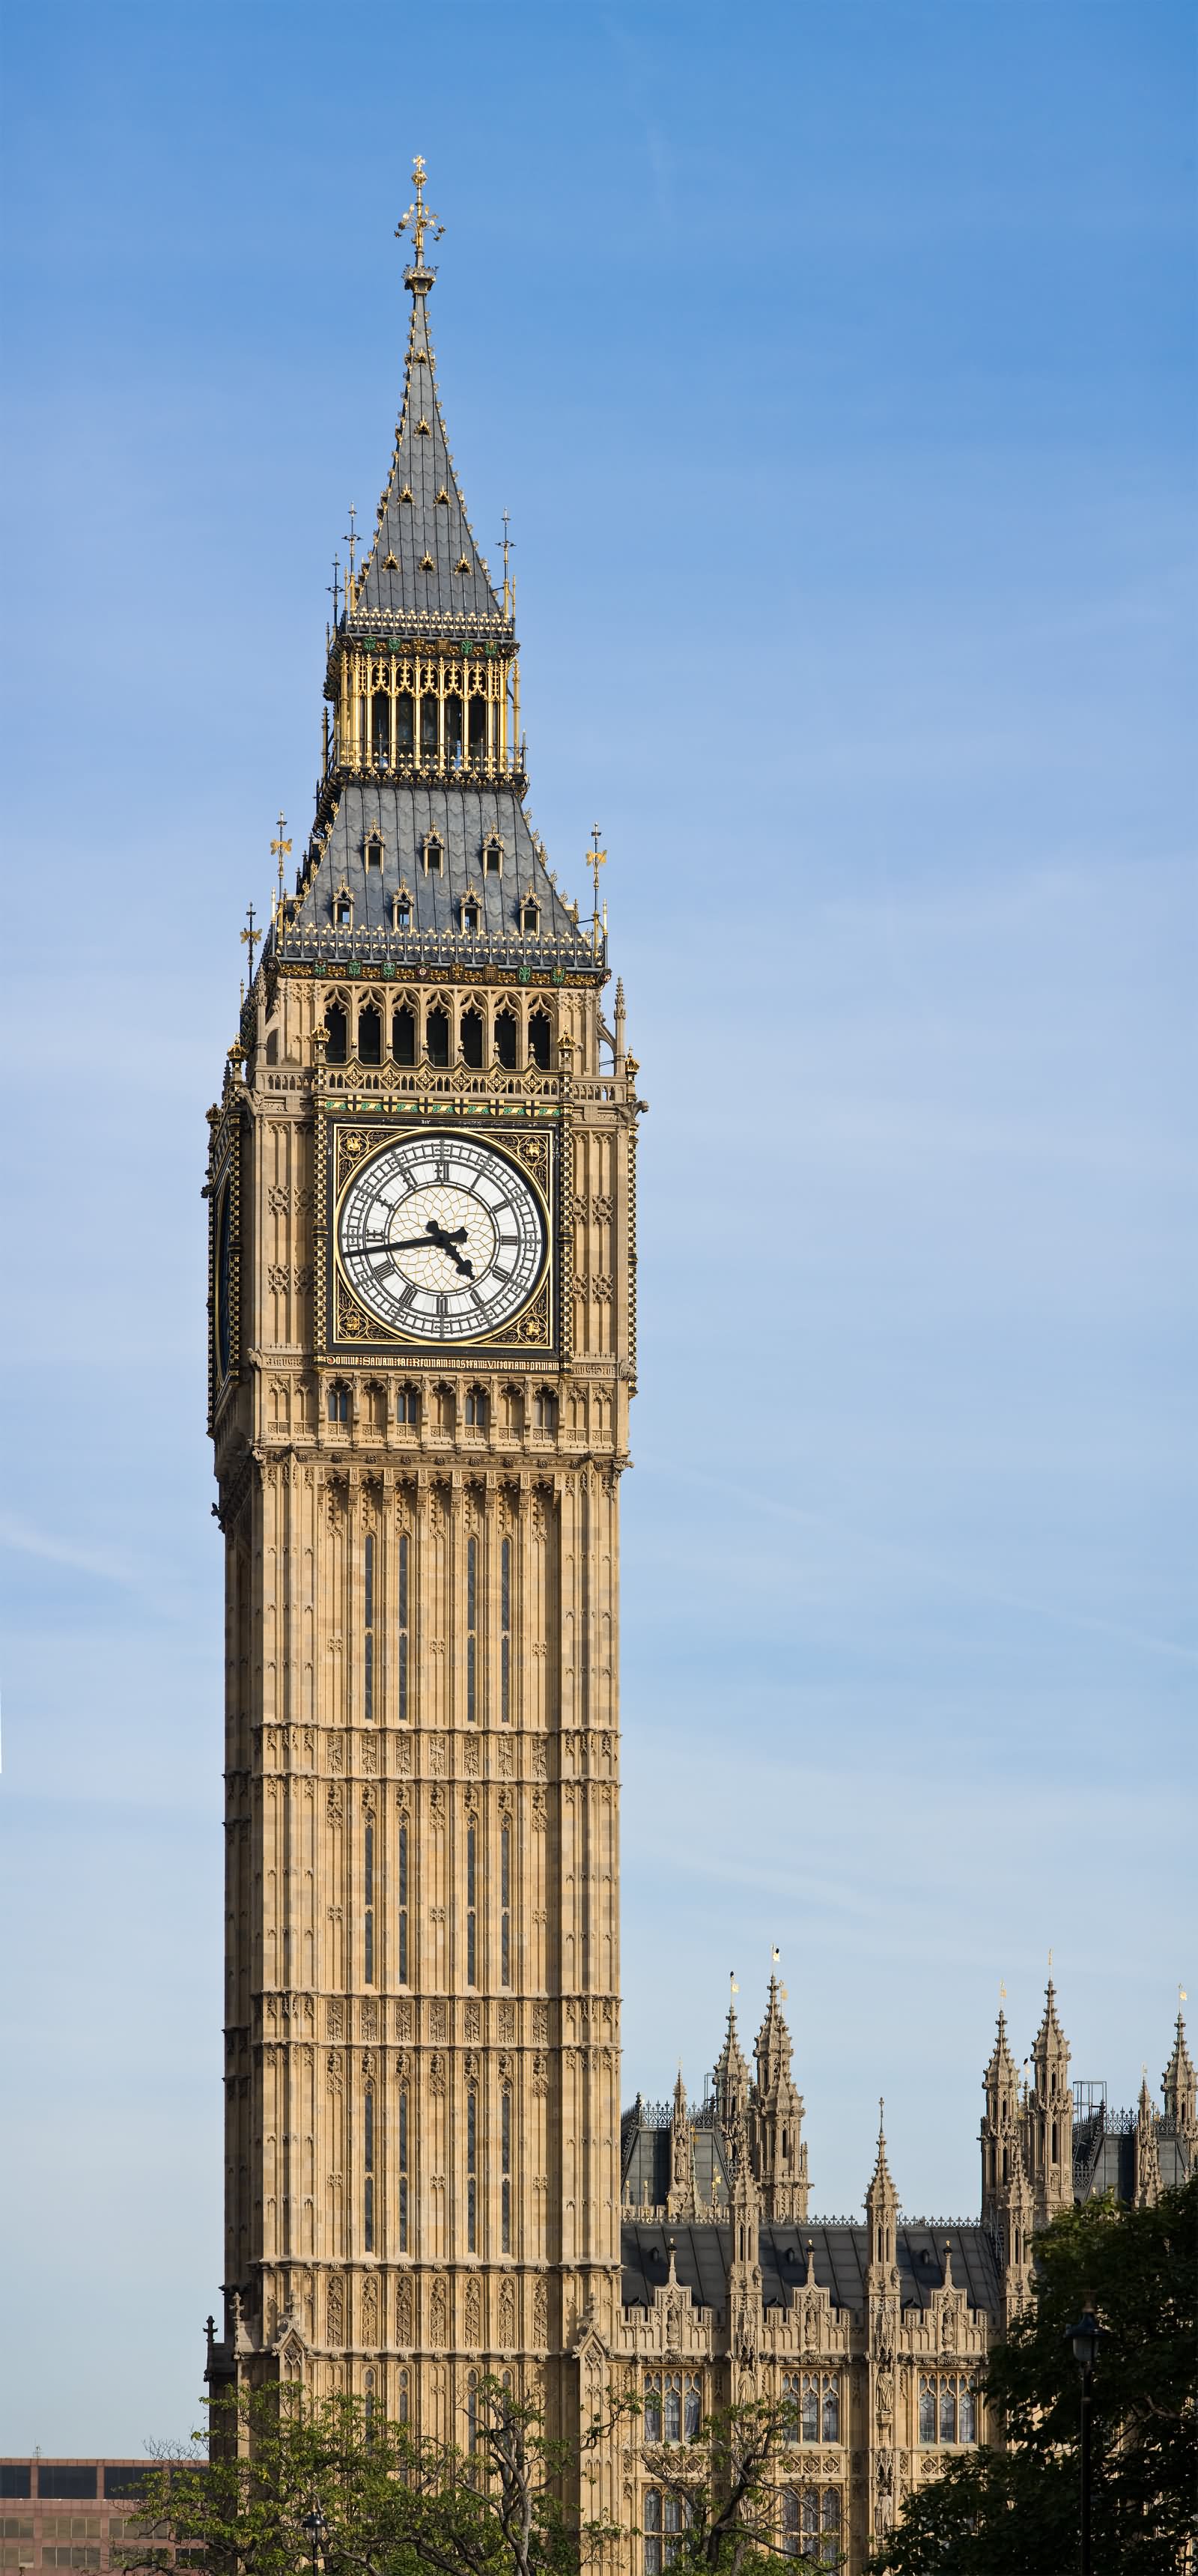 40 Very Beautiful Big Ben, London Images And Pictures